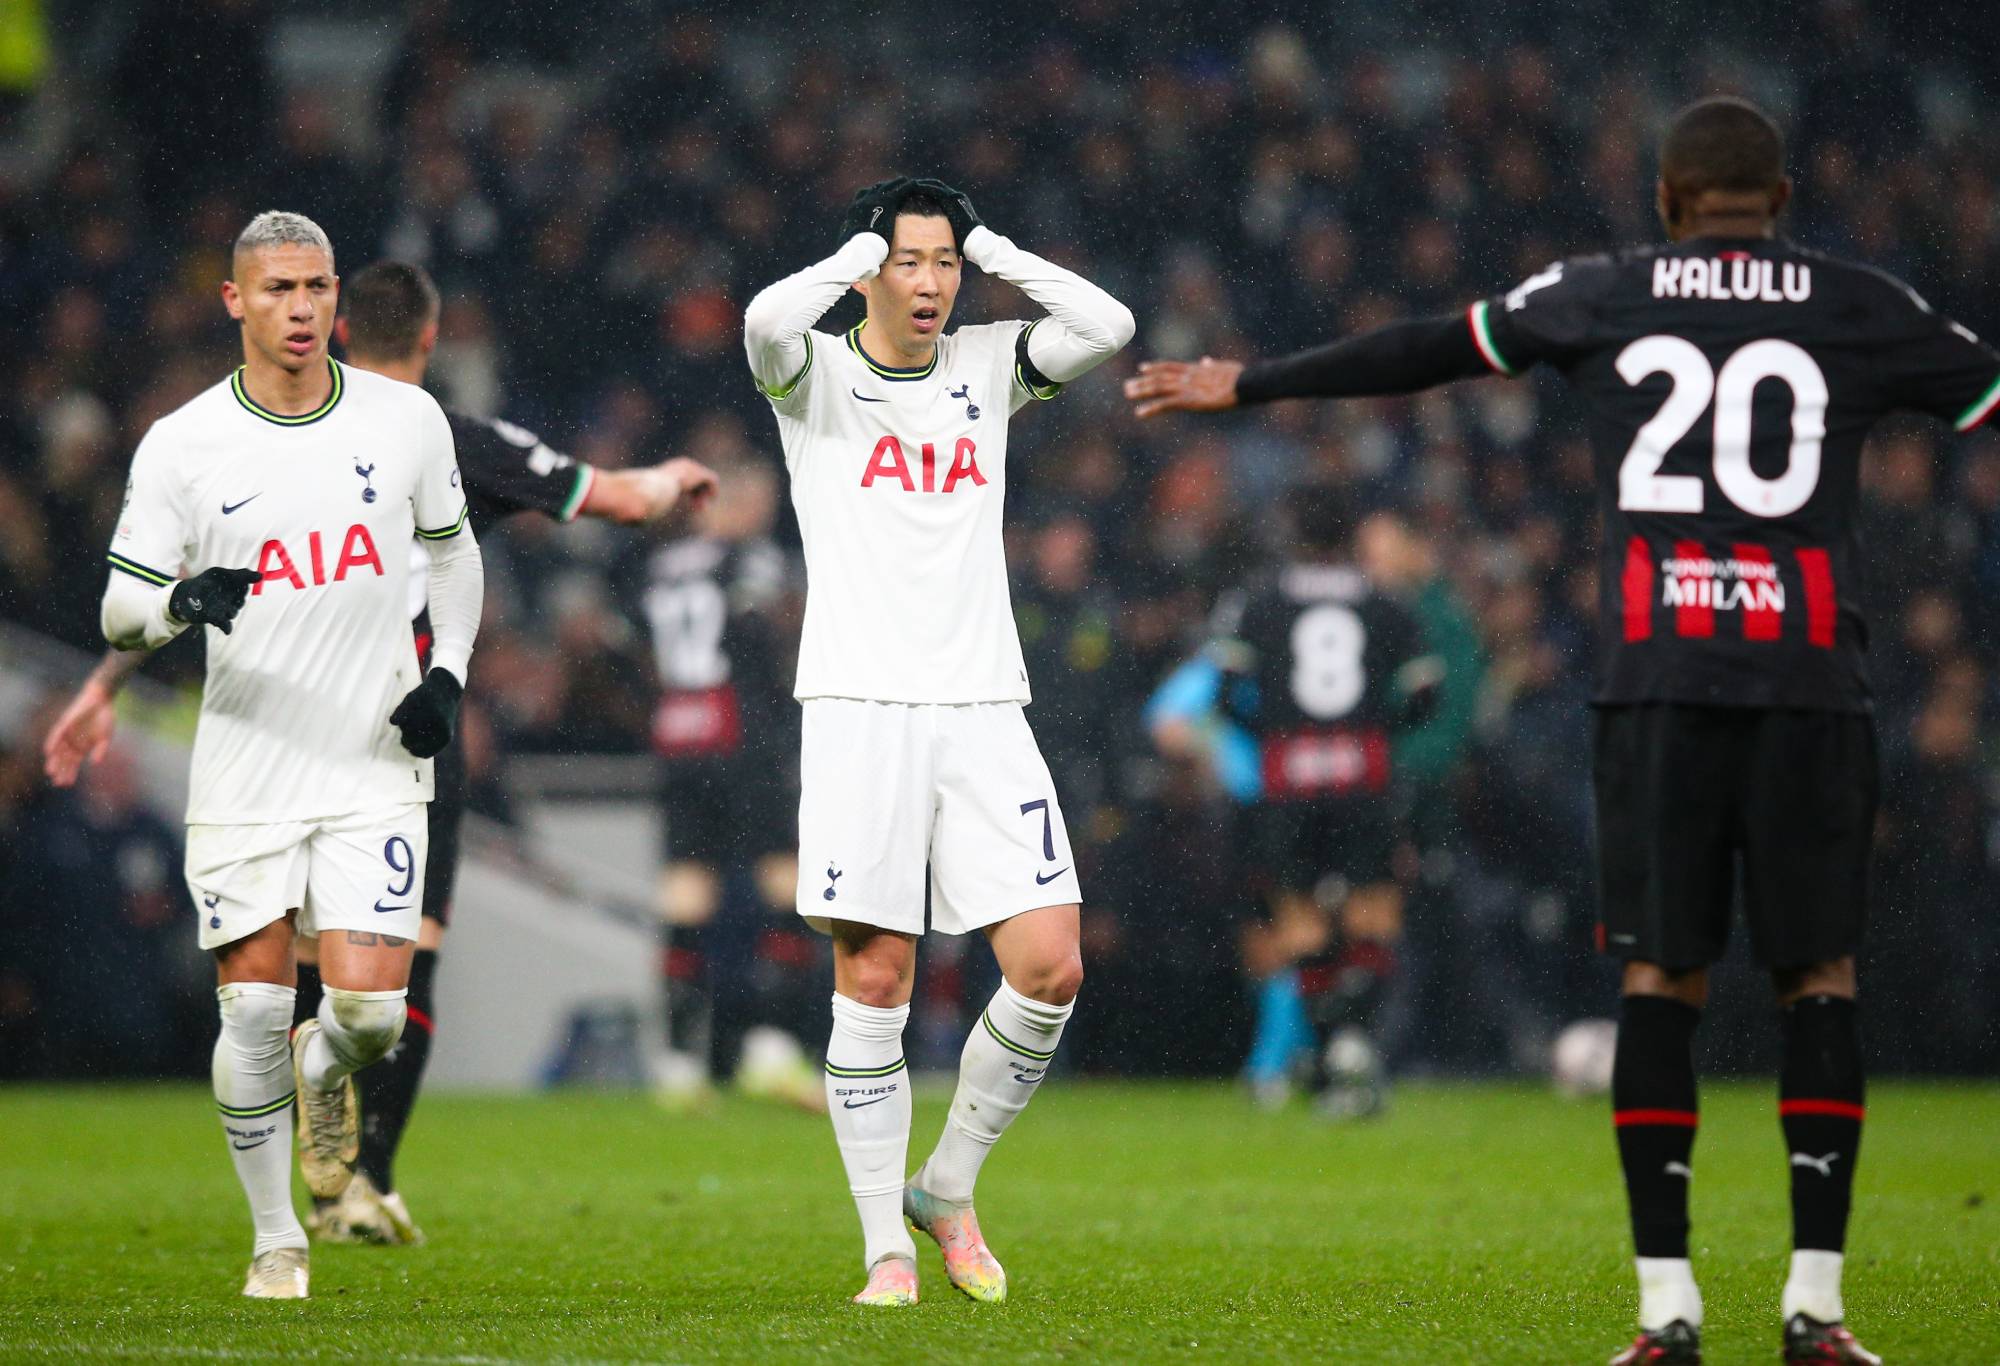 Heung-Min Son of Tottenham Hotspur looks dejected during the UEFA Champions League Round of 16 match between Tottenham Hotspur and AC Milan at Tottenham Hotspur Stadium on March 8, 2023 in London, United Kingdom. (Photo by Craig Mercer/MB Media/Getty Images)